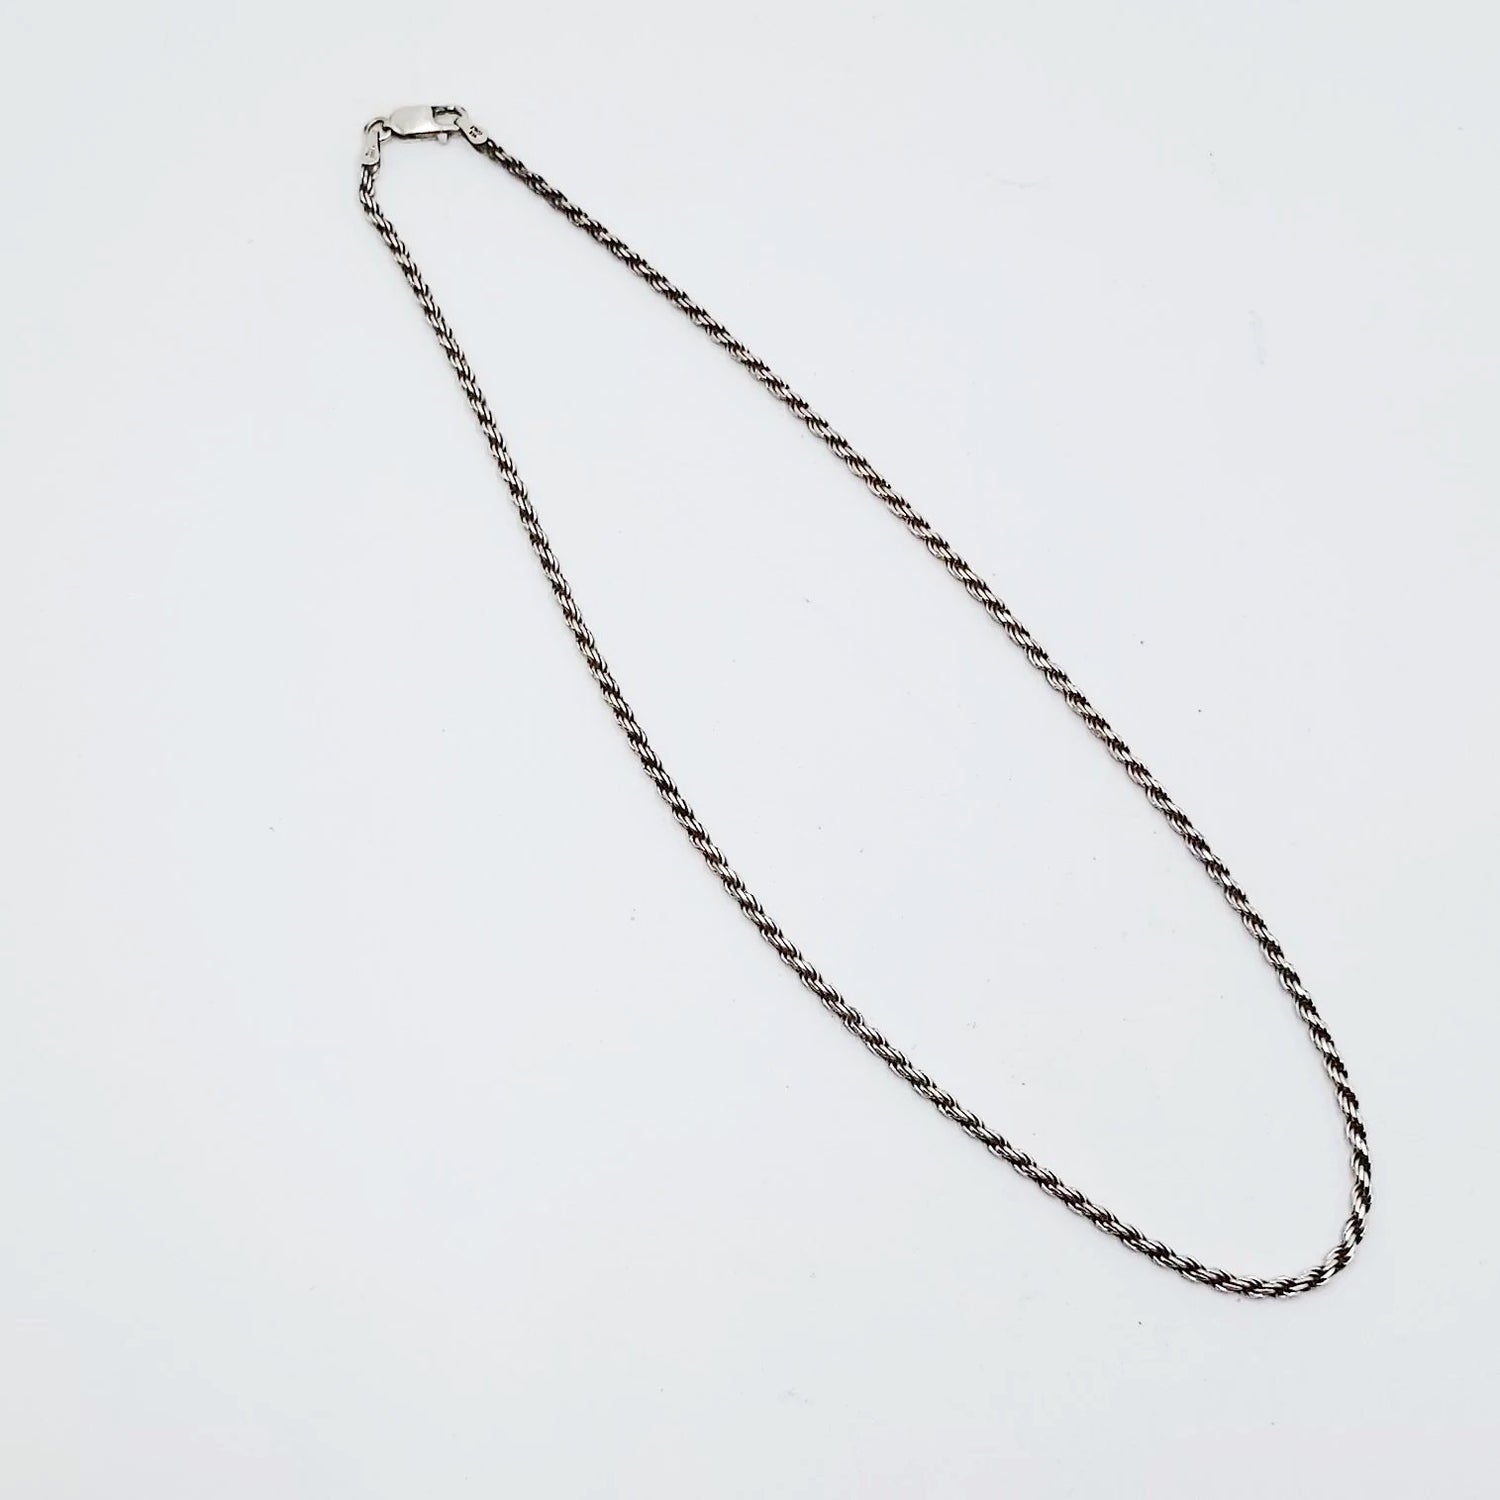 Silver Rope Chain 16" Necklace Sterling 925 - Elevated Metaphysical